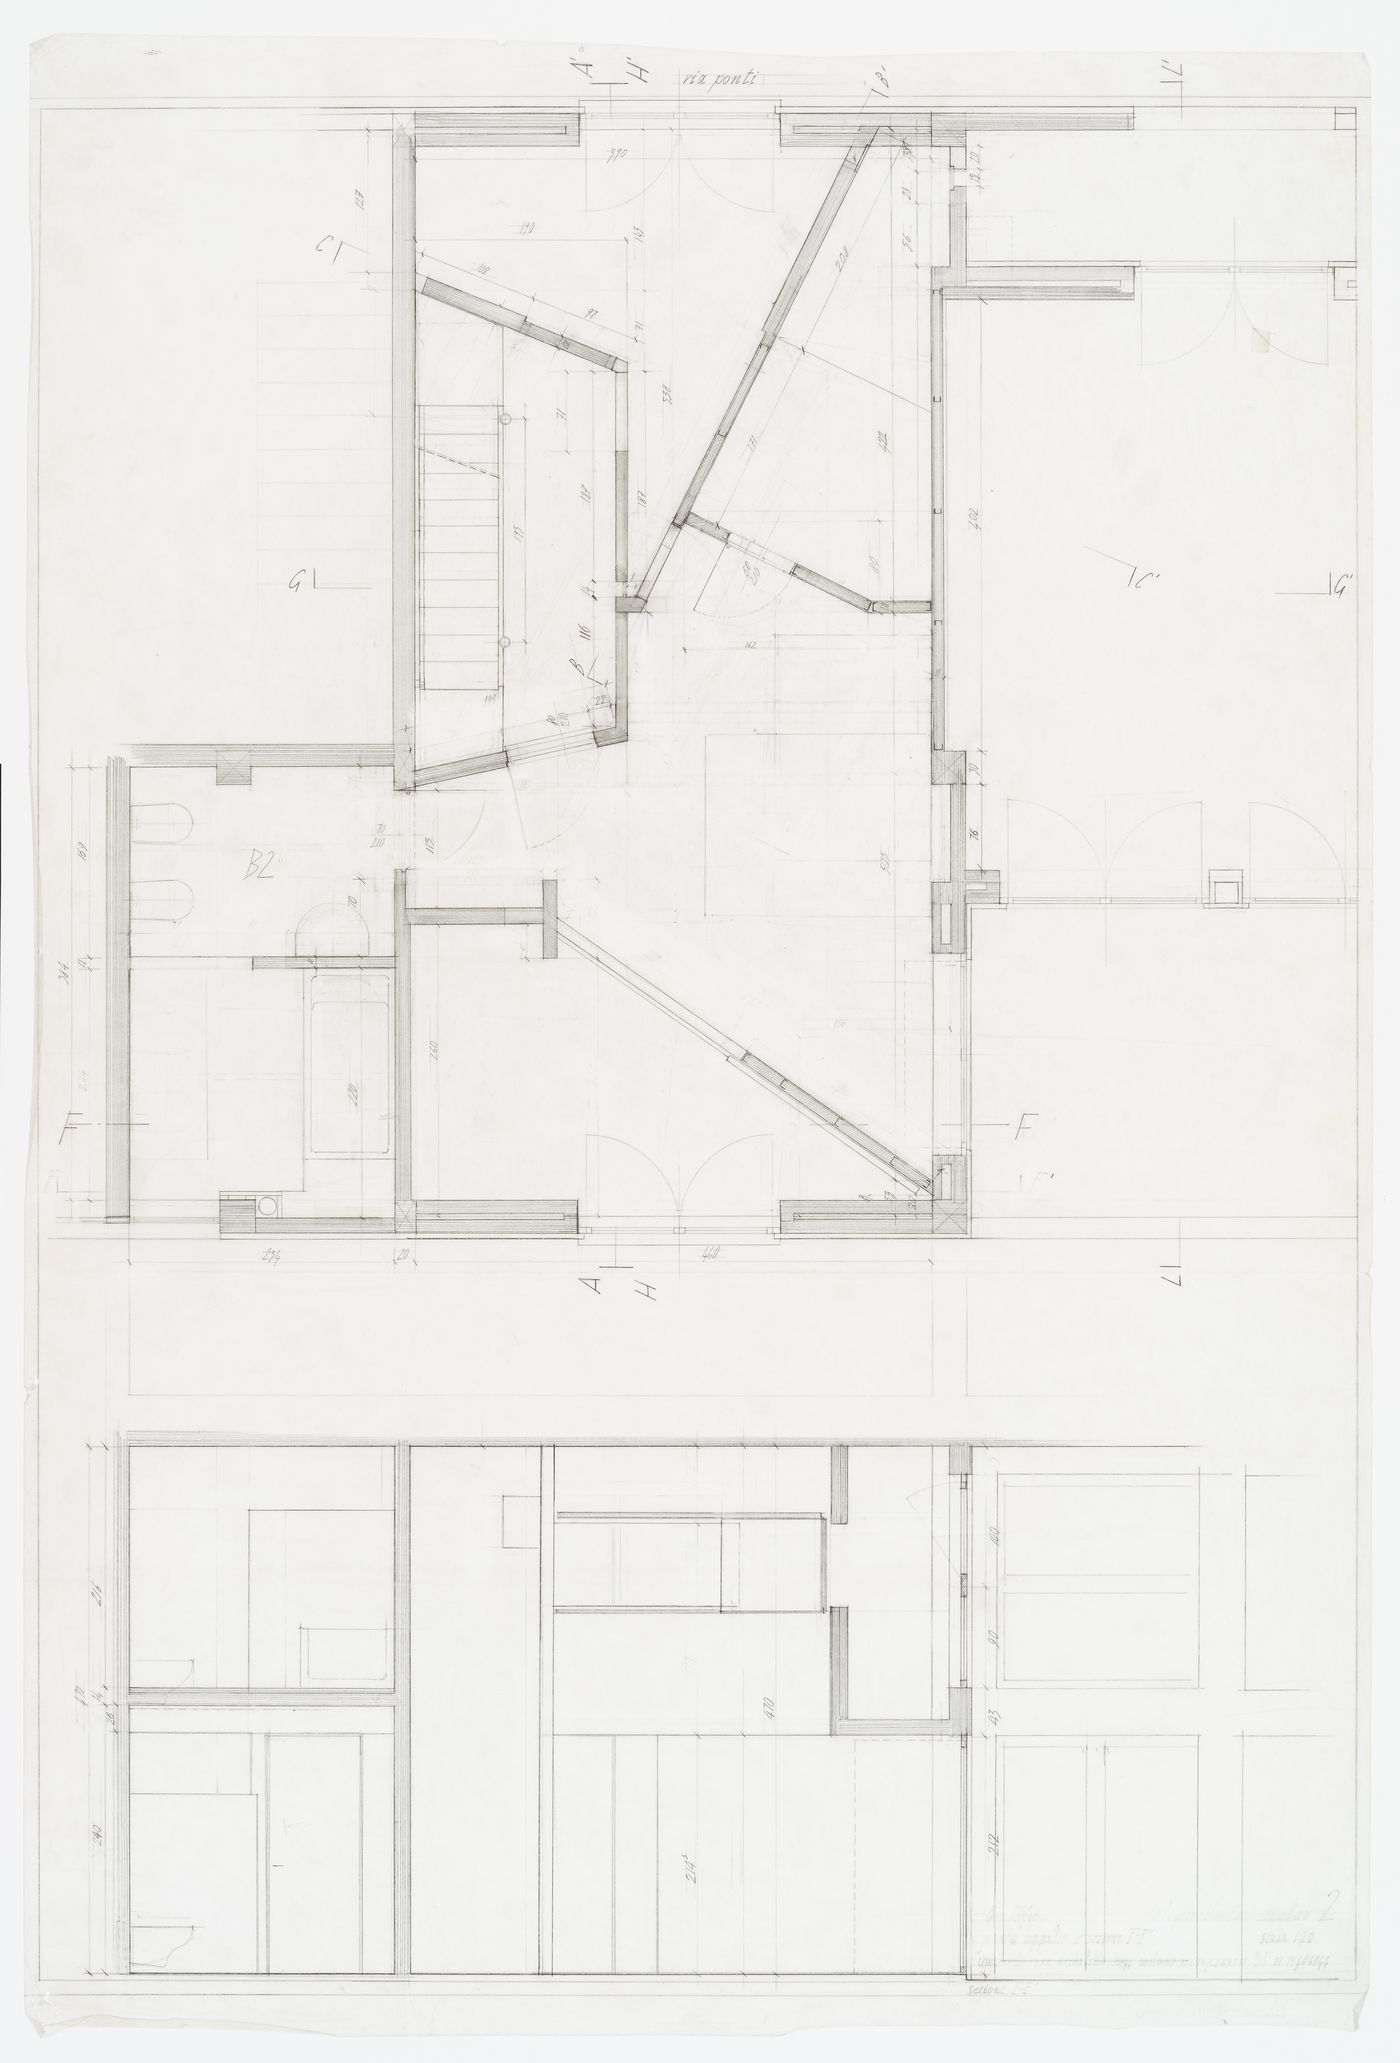 Floor plan and second floor for Casa Righi, Milan, Italy